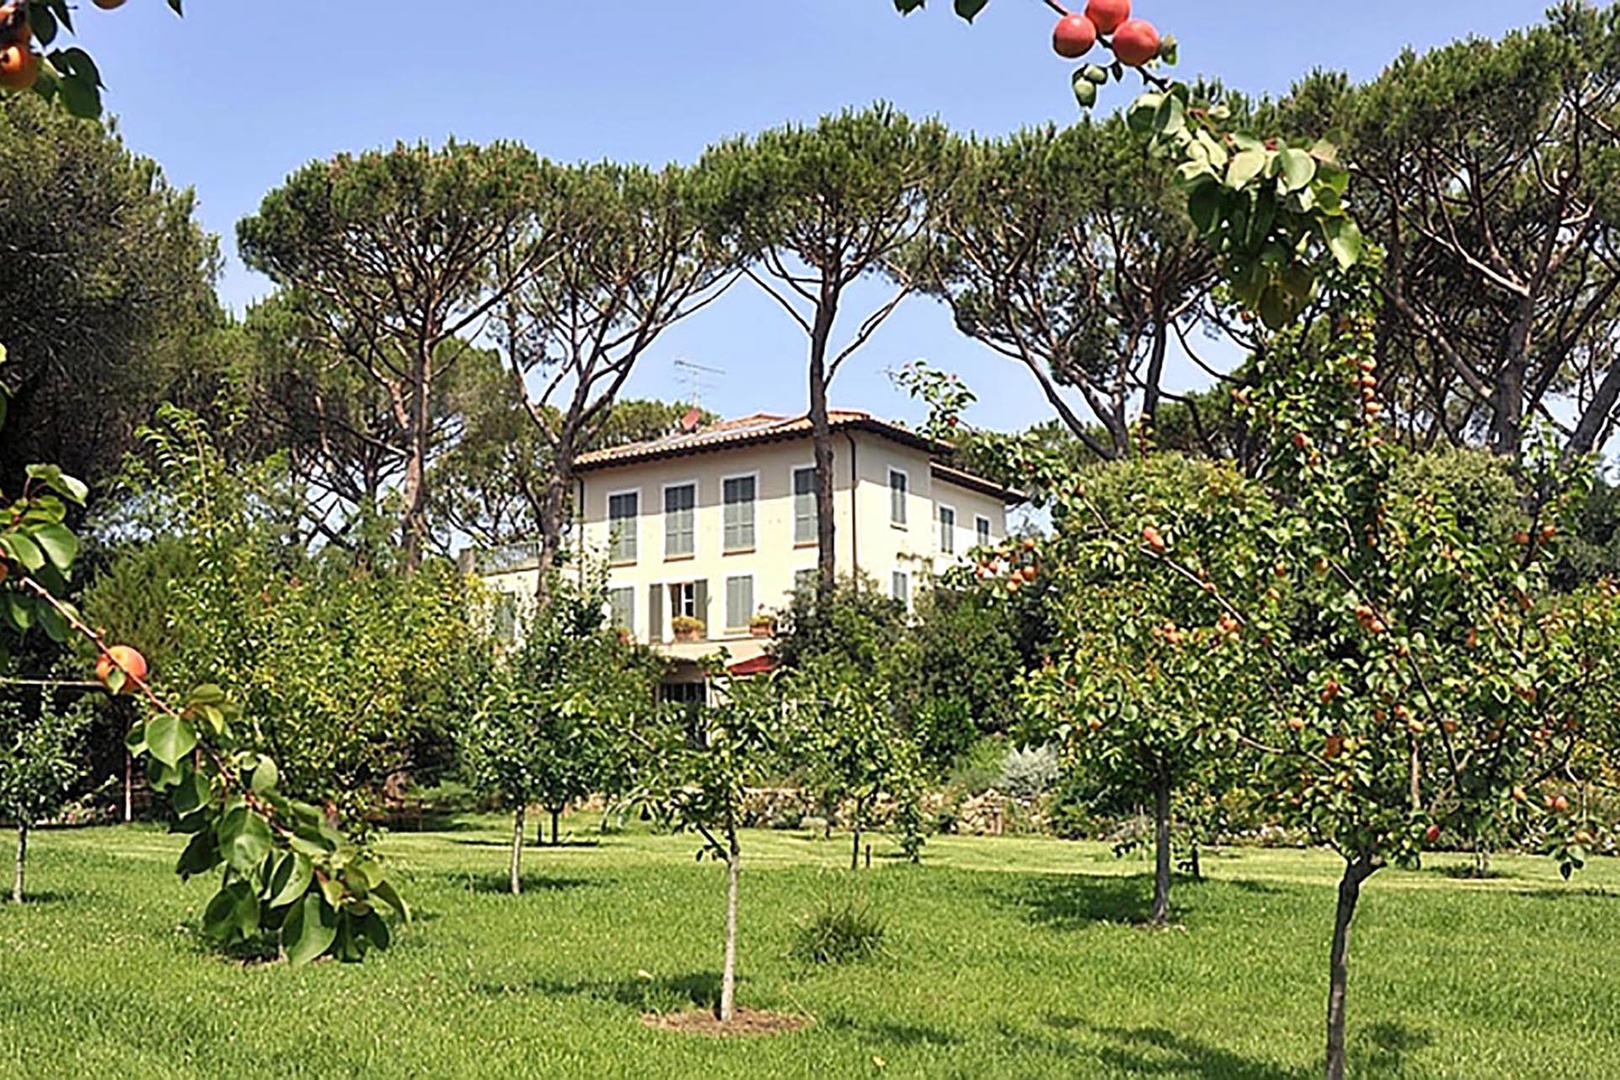 The lushly landscaped Destino Villa is what Tuscan dreams are made of.